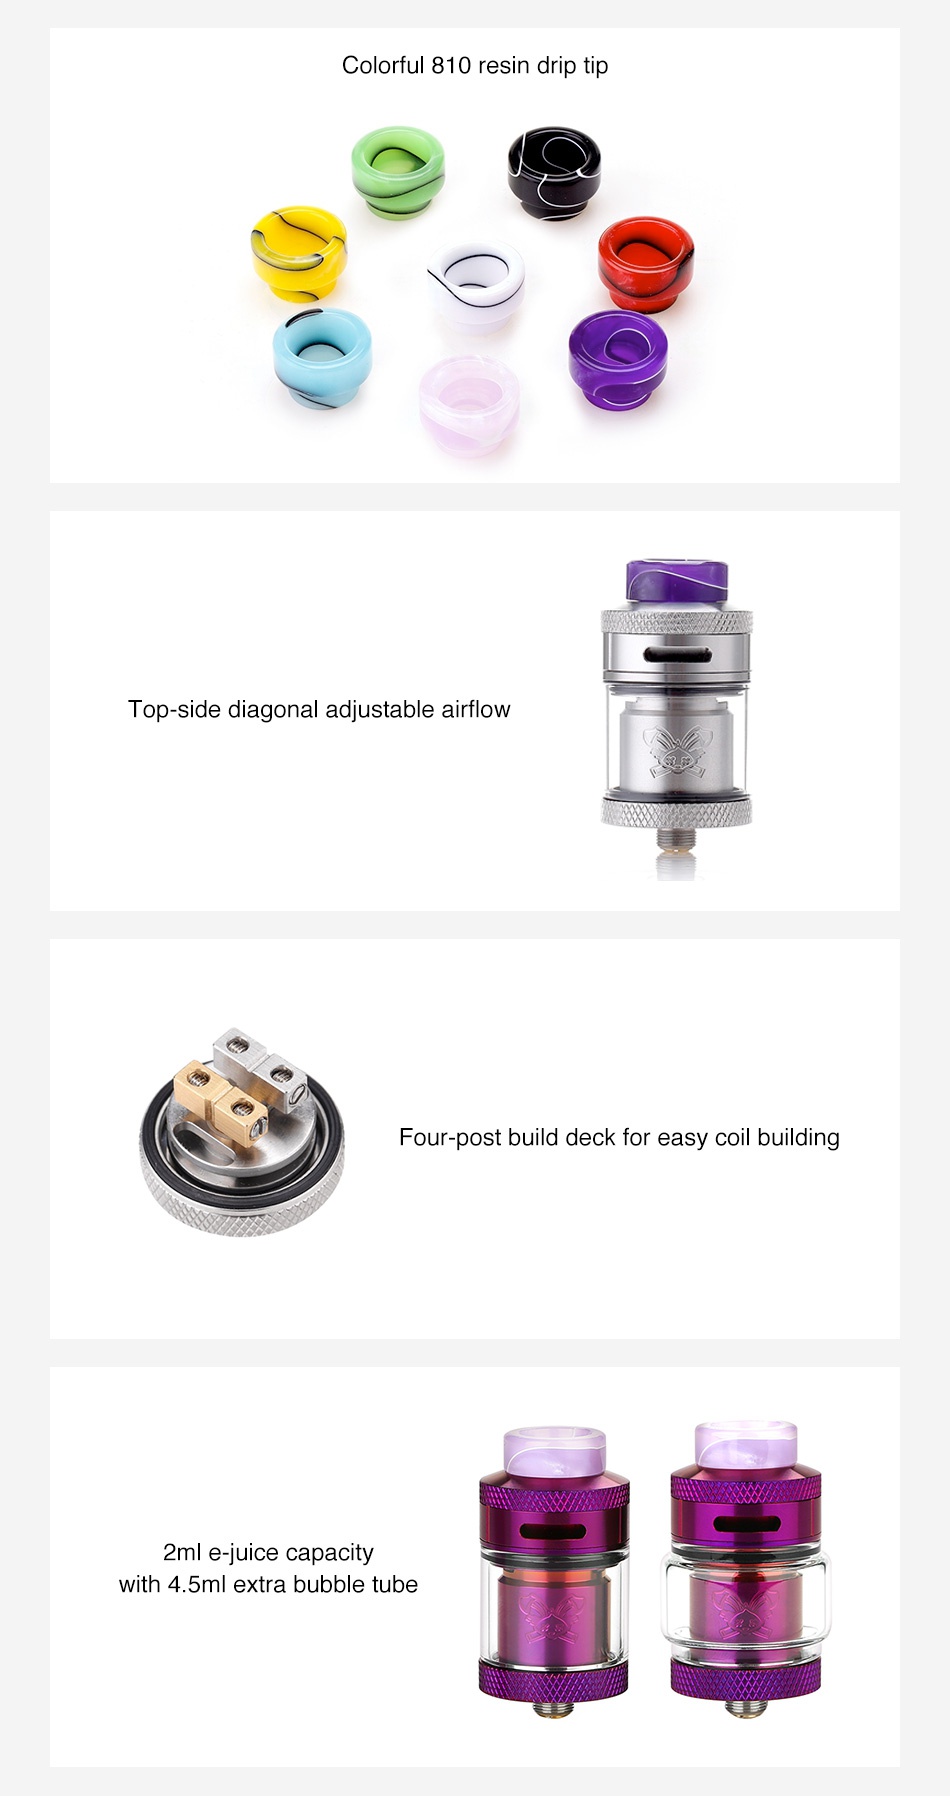 Hellvape Dead Rabbit RTA 2ml Colorful 810 resin drip tip op side diagonal adjustable airflow Four post build deck for easy coil building 2ml e juice capacity ith 4 5ml extra bubble tube